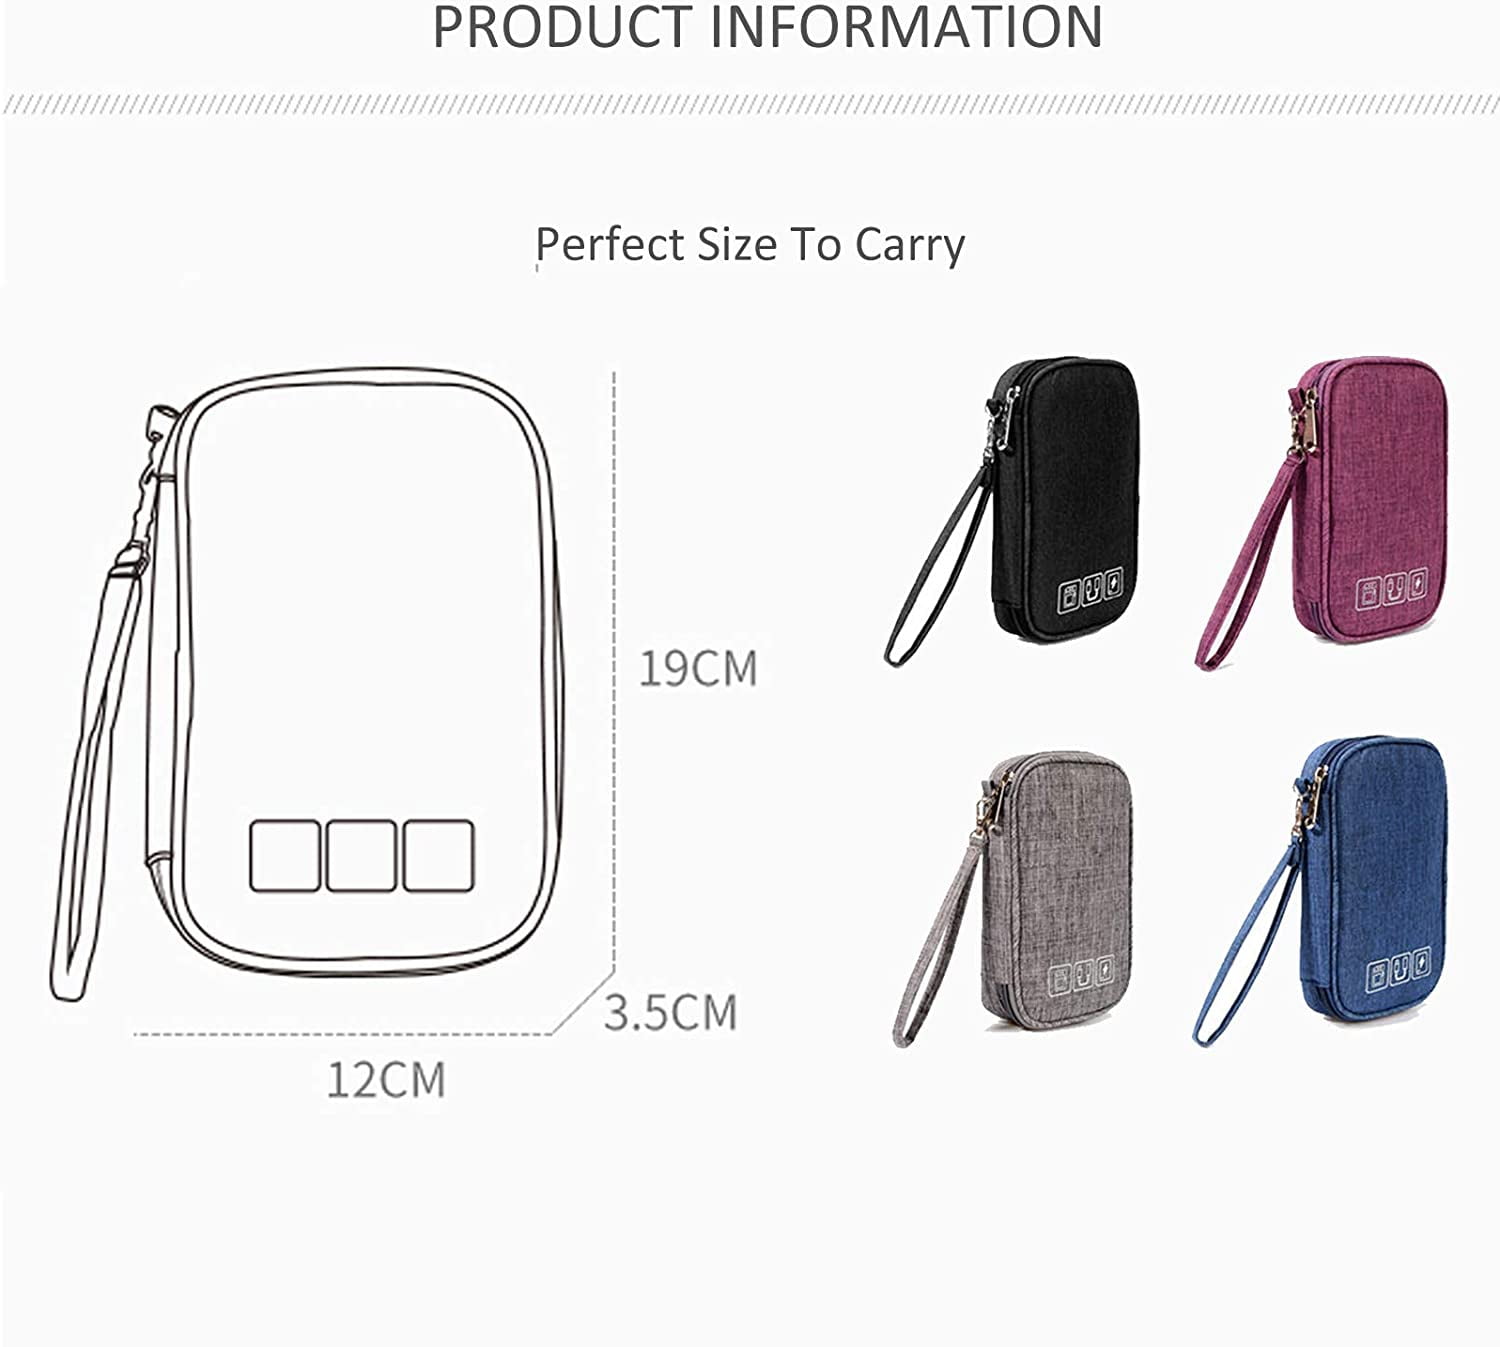 Phone Grey+Purple 2PCS Cable Organizer Bag SD Card,with 5pcs Cable Ties USB Travel Cord Organizer Pouch Small Electronics Accessories Bag Tech Cord Storage Pouch for Cable Charger 